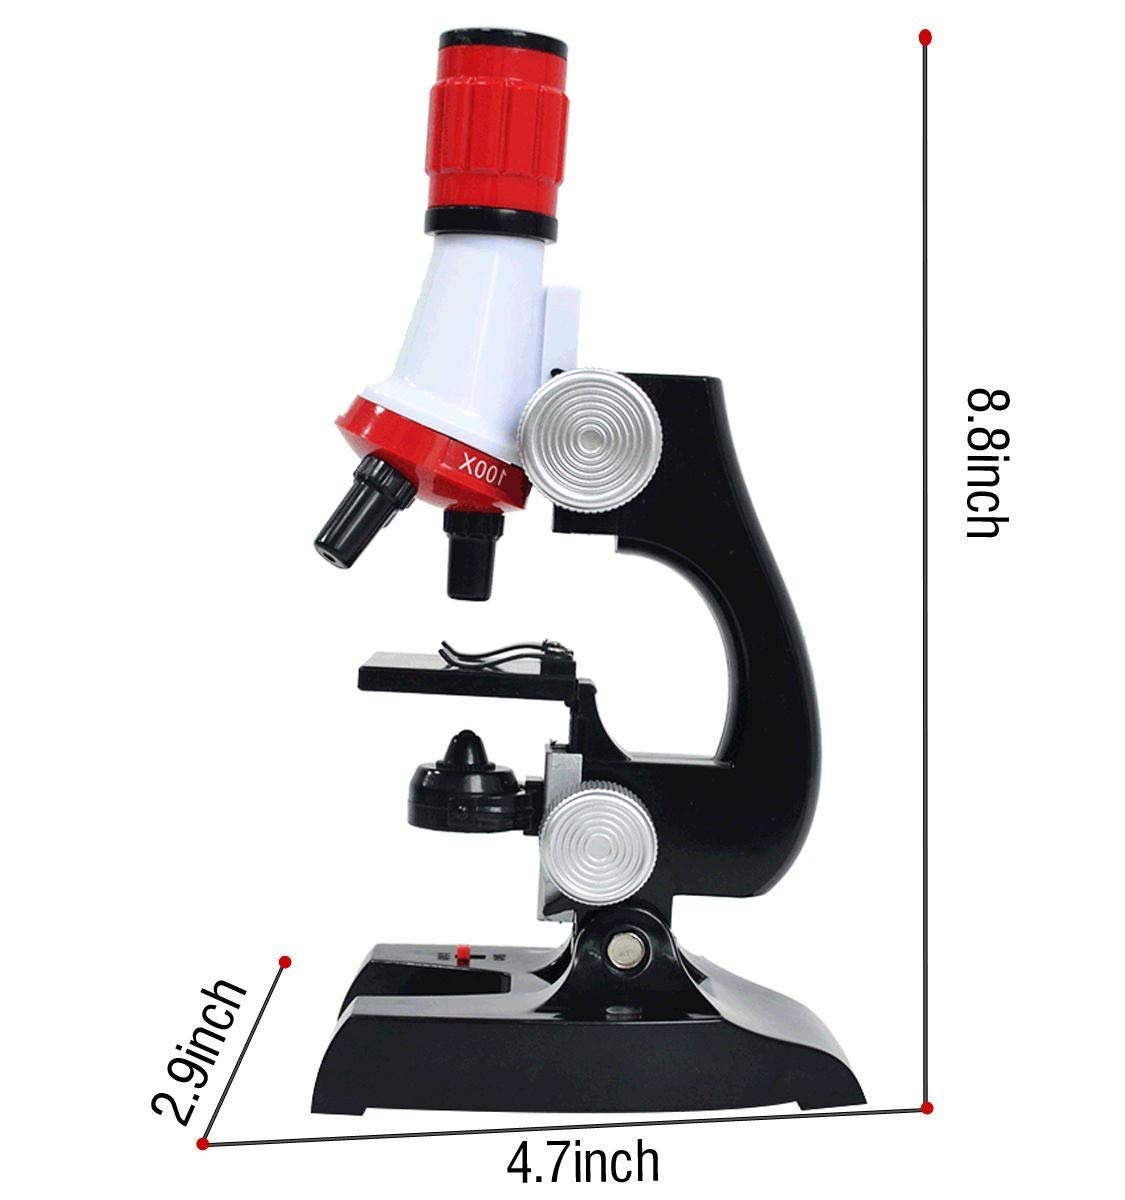 Science Microscope, Educational Toy Real Working Microscope for Kids  (Multicolor)